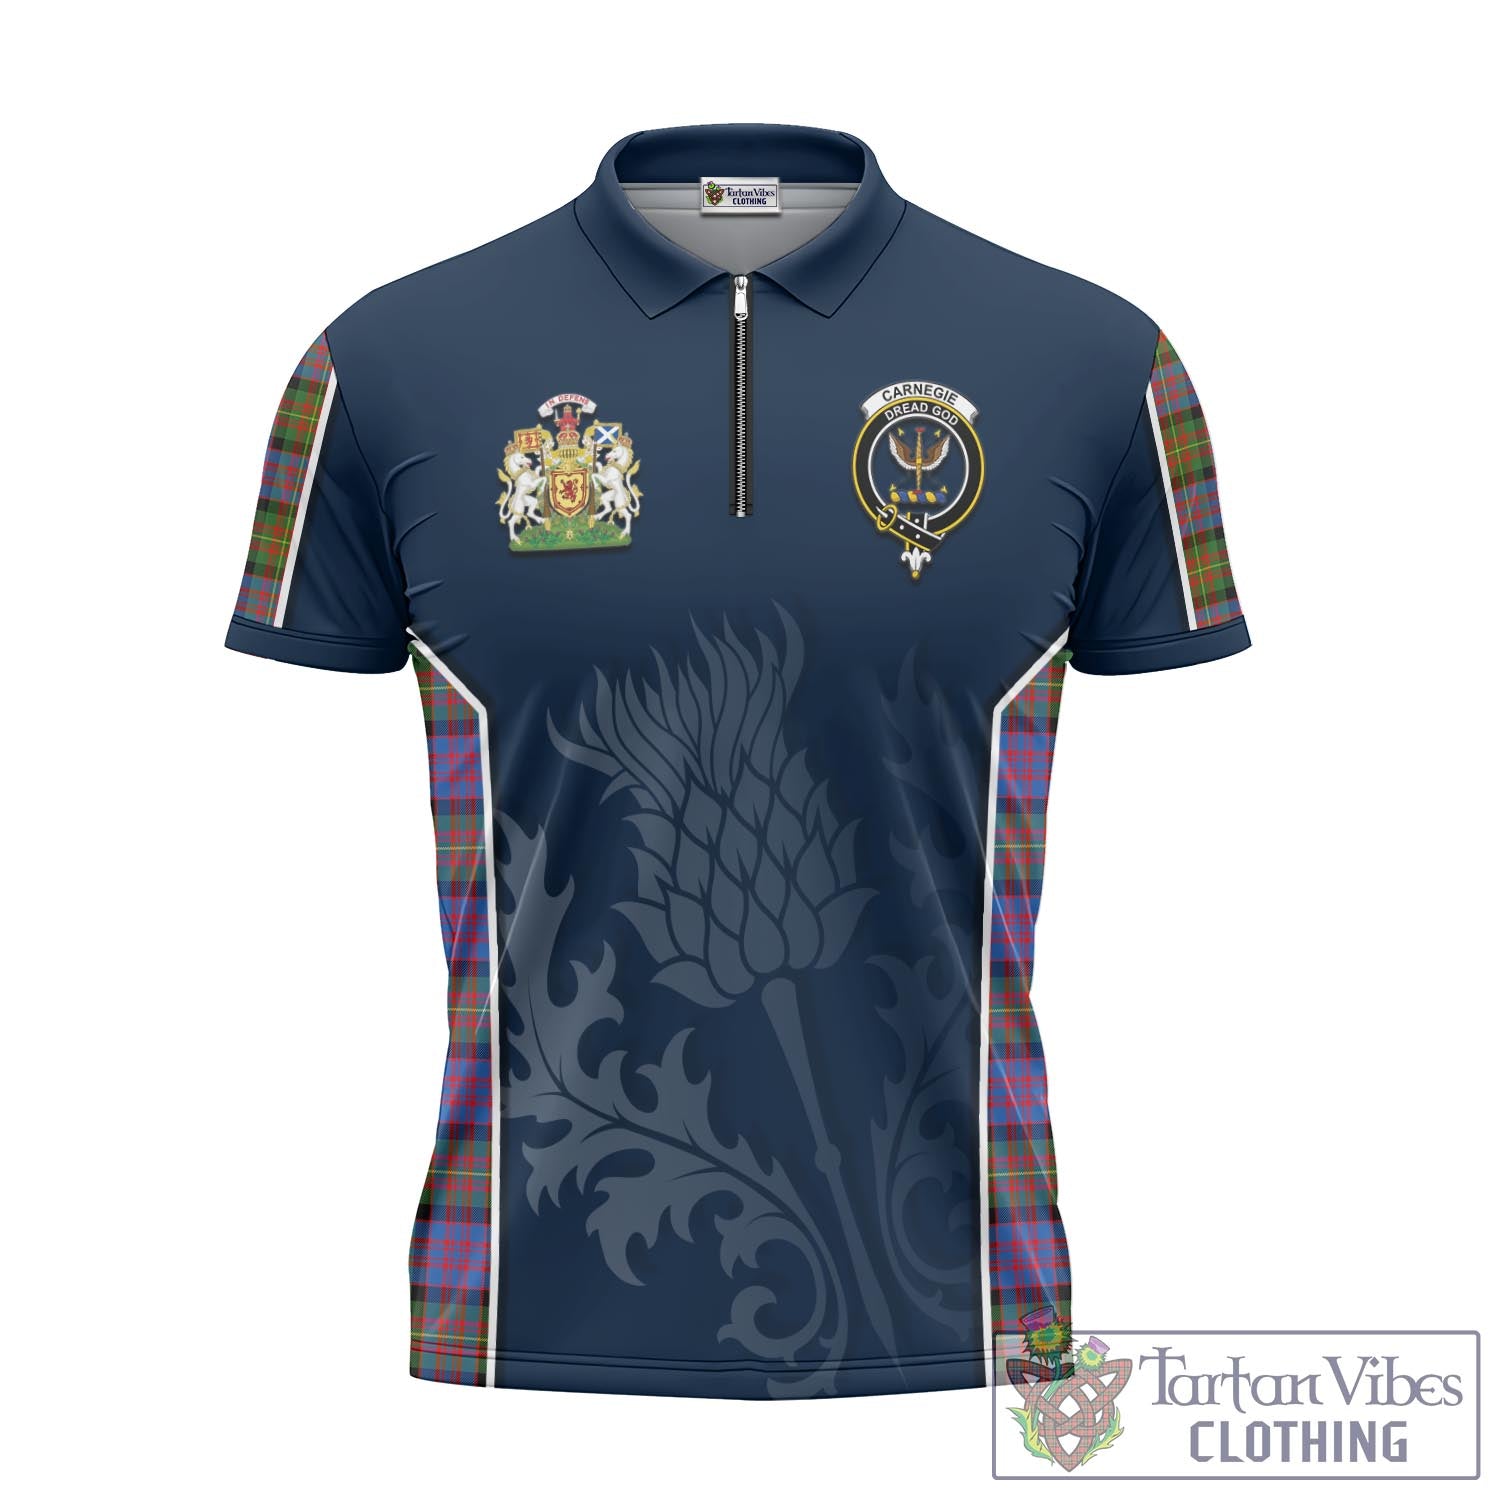 Tartan Vibes Clothing Carnegie Ancient Tartan Zipper Polo Shirt with Family Crest and Scottish Thistle Vibes Sport Style